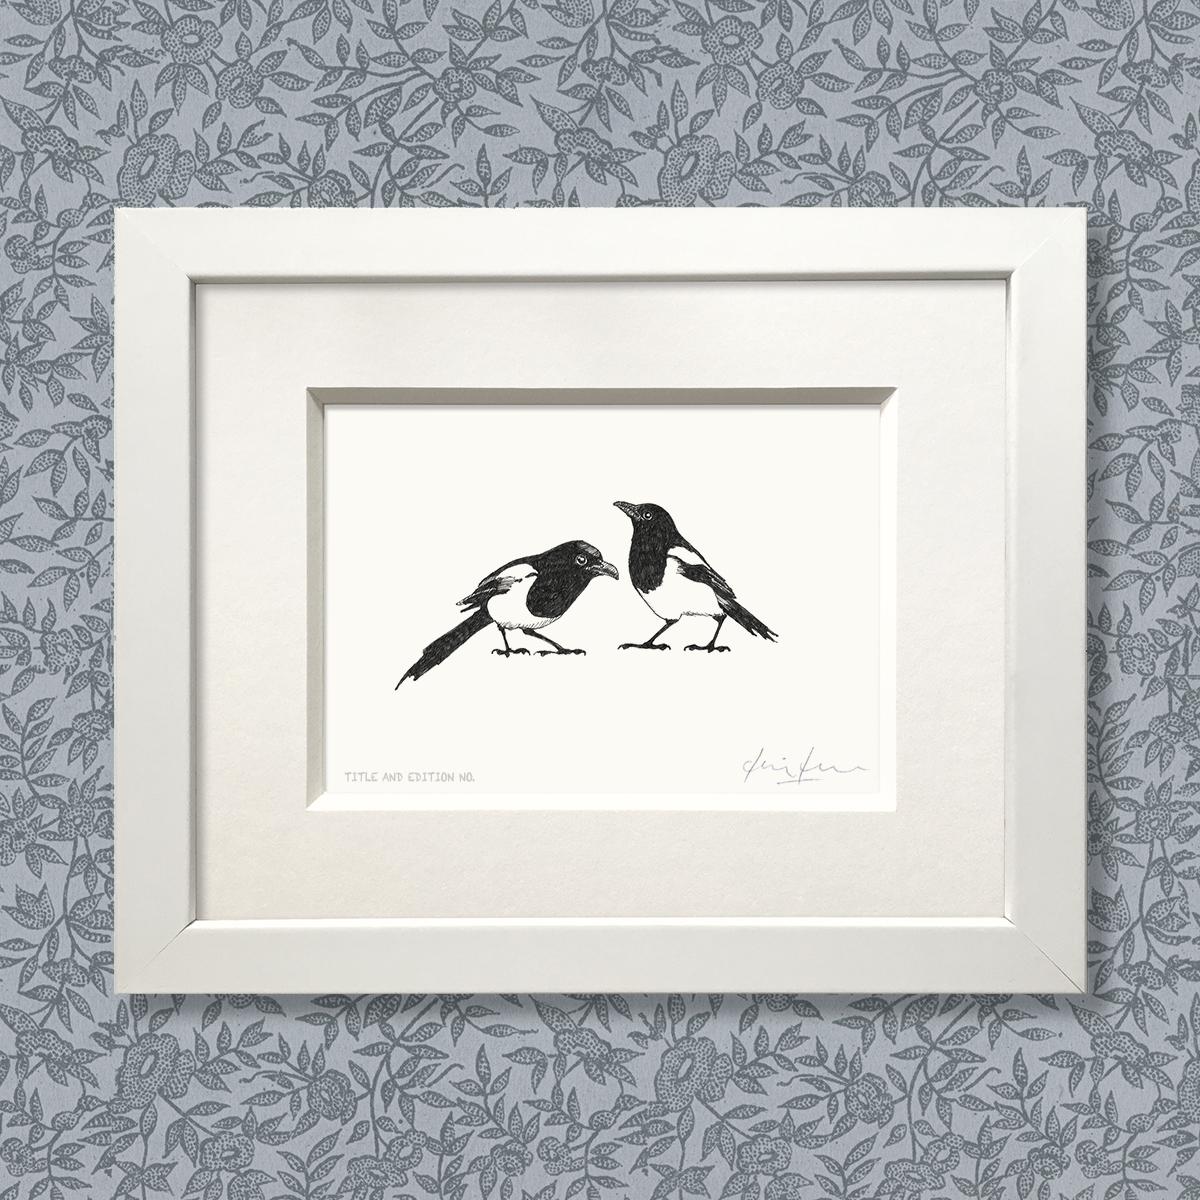 Limited edition print from pen and ink drawing of two magpies in white frame